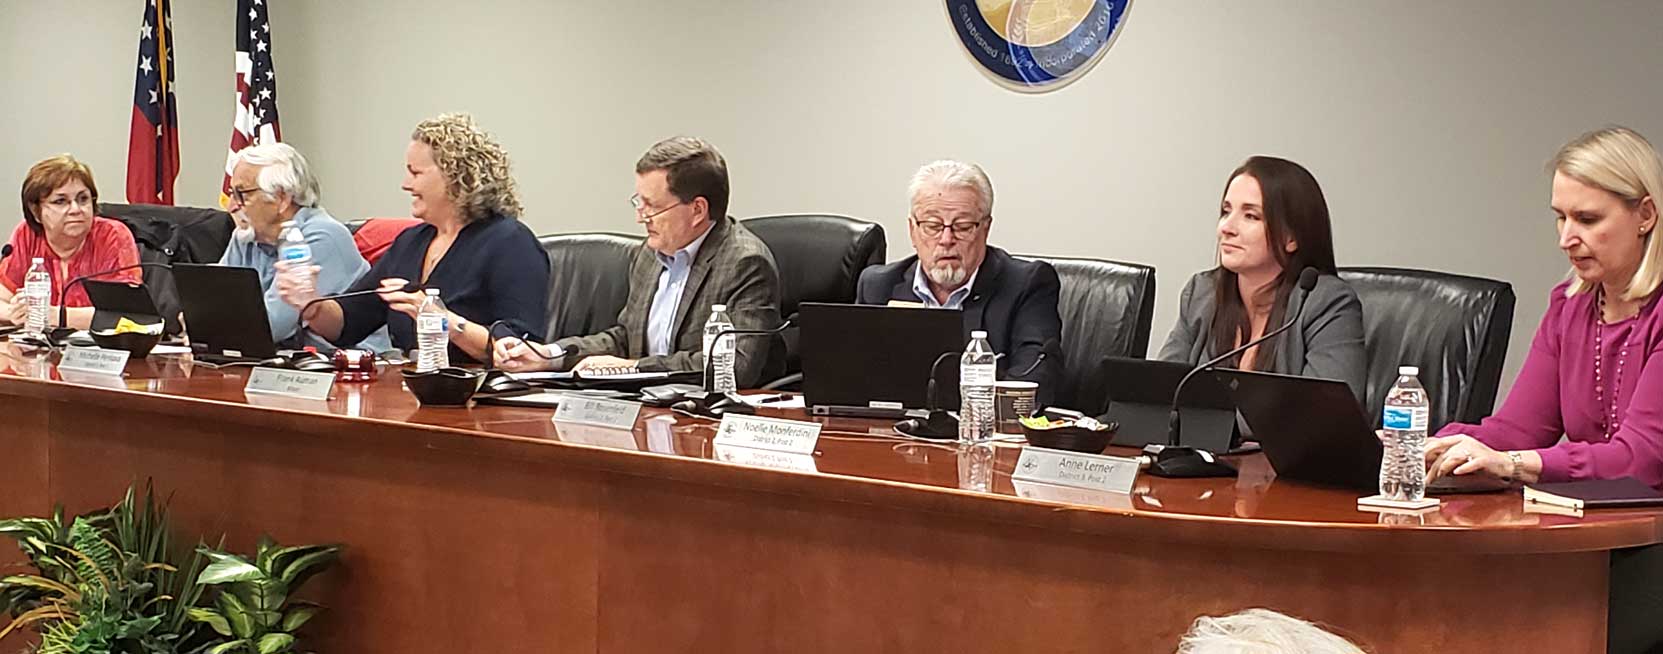 City Council Update May 2019